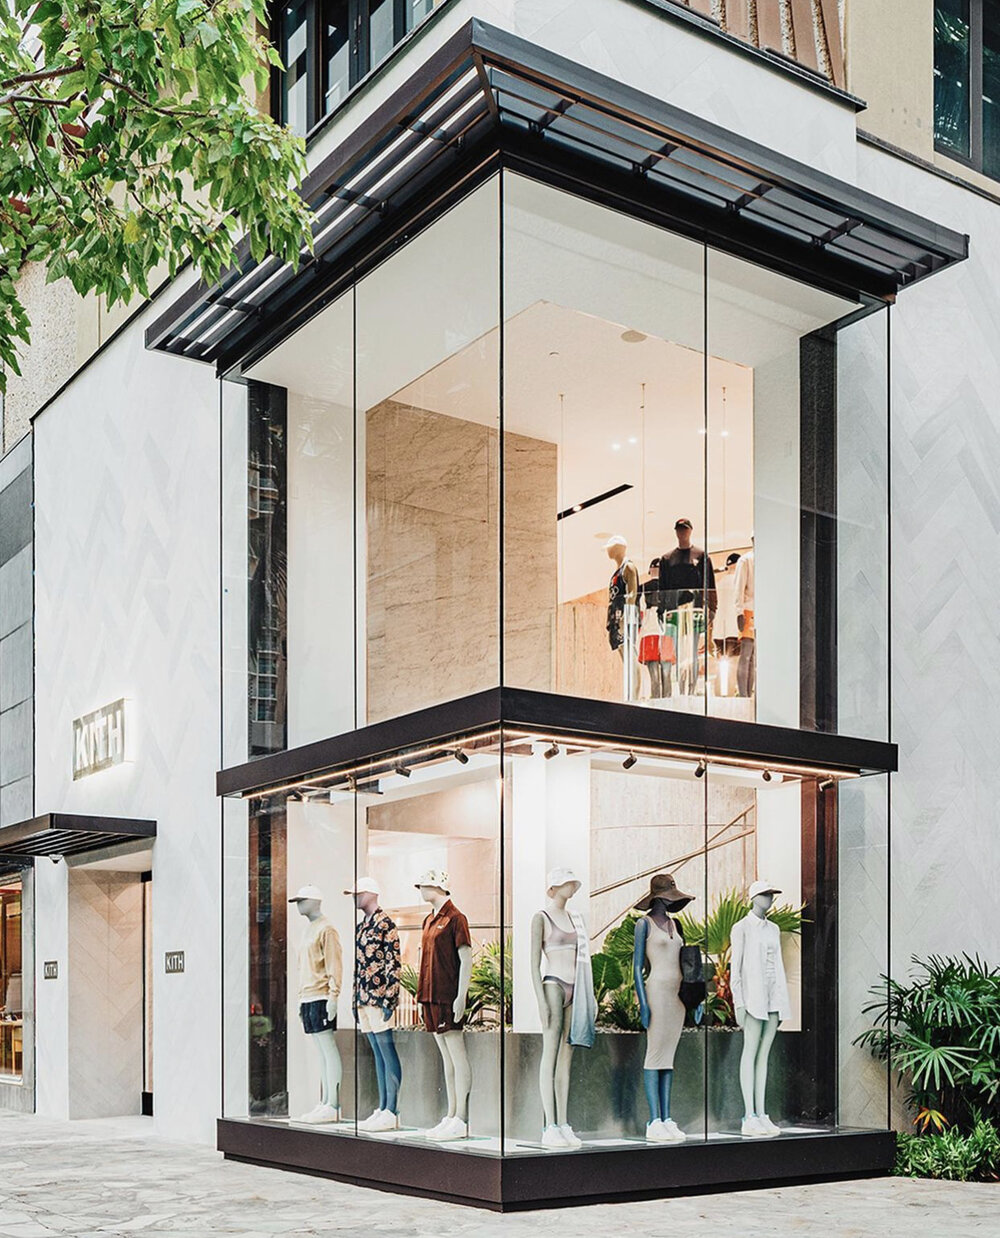 Store openings 2021: 10 retailers that are opening new shops